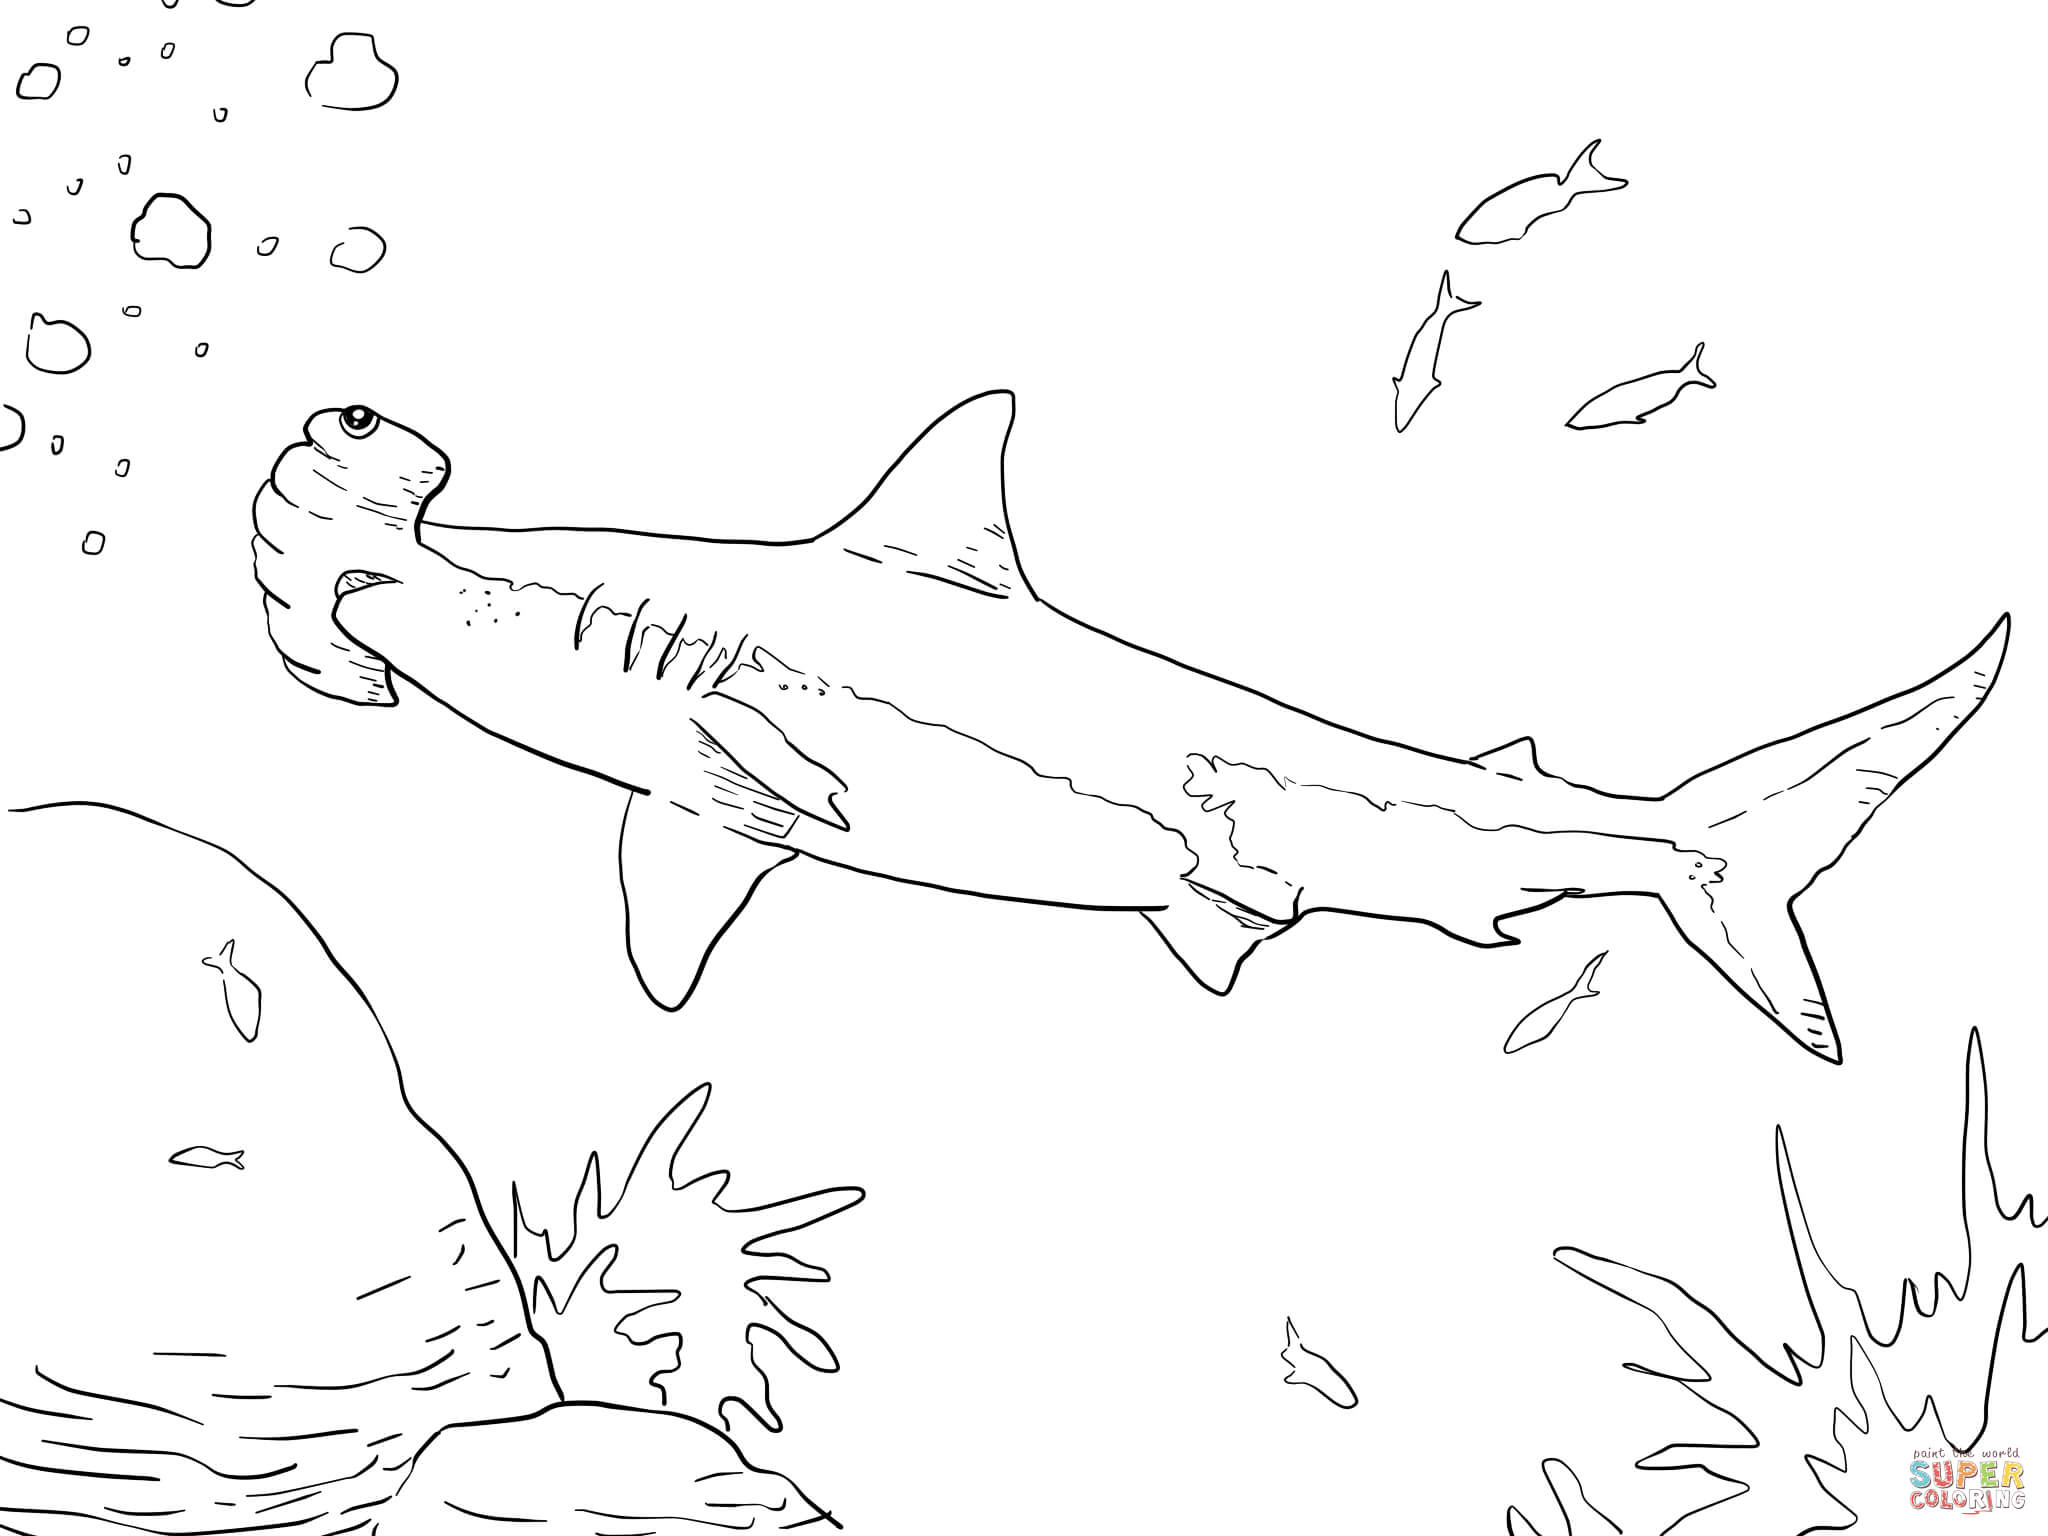 hammerhead shark coloring pages - Clip Art Library